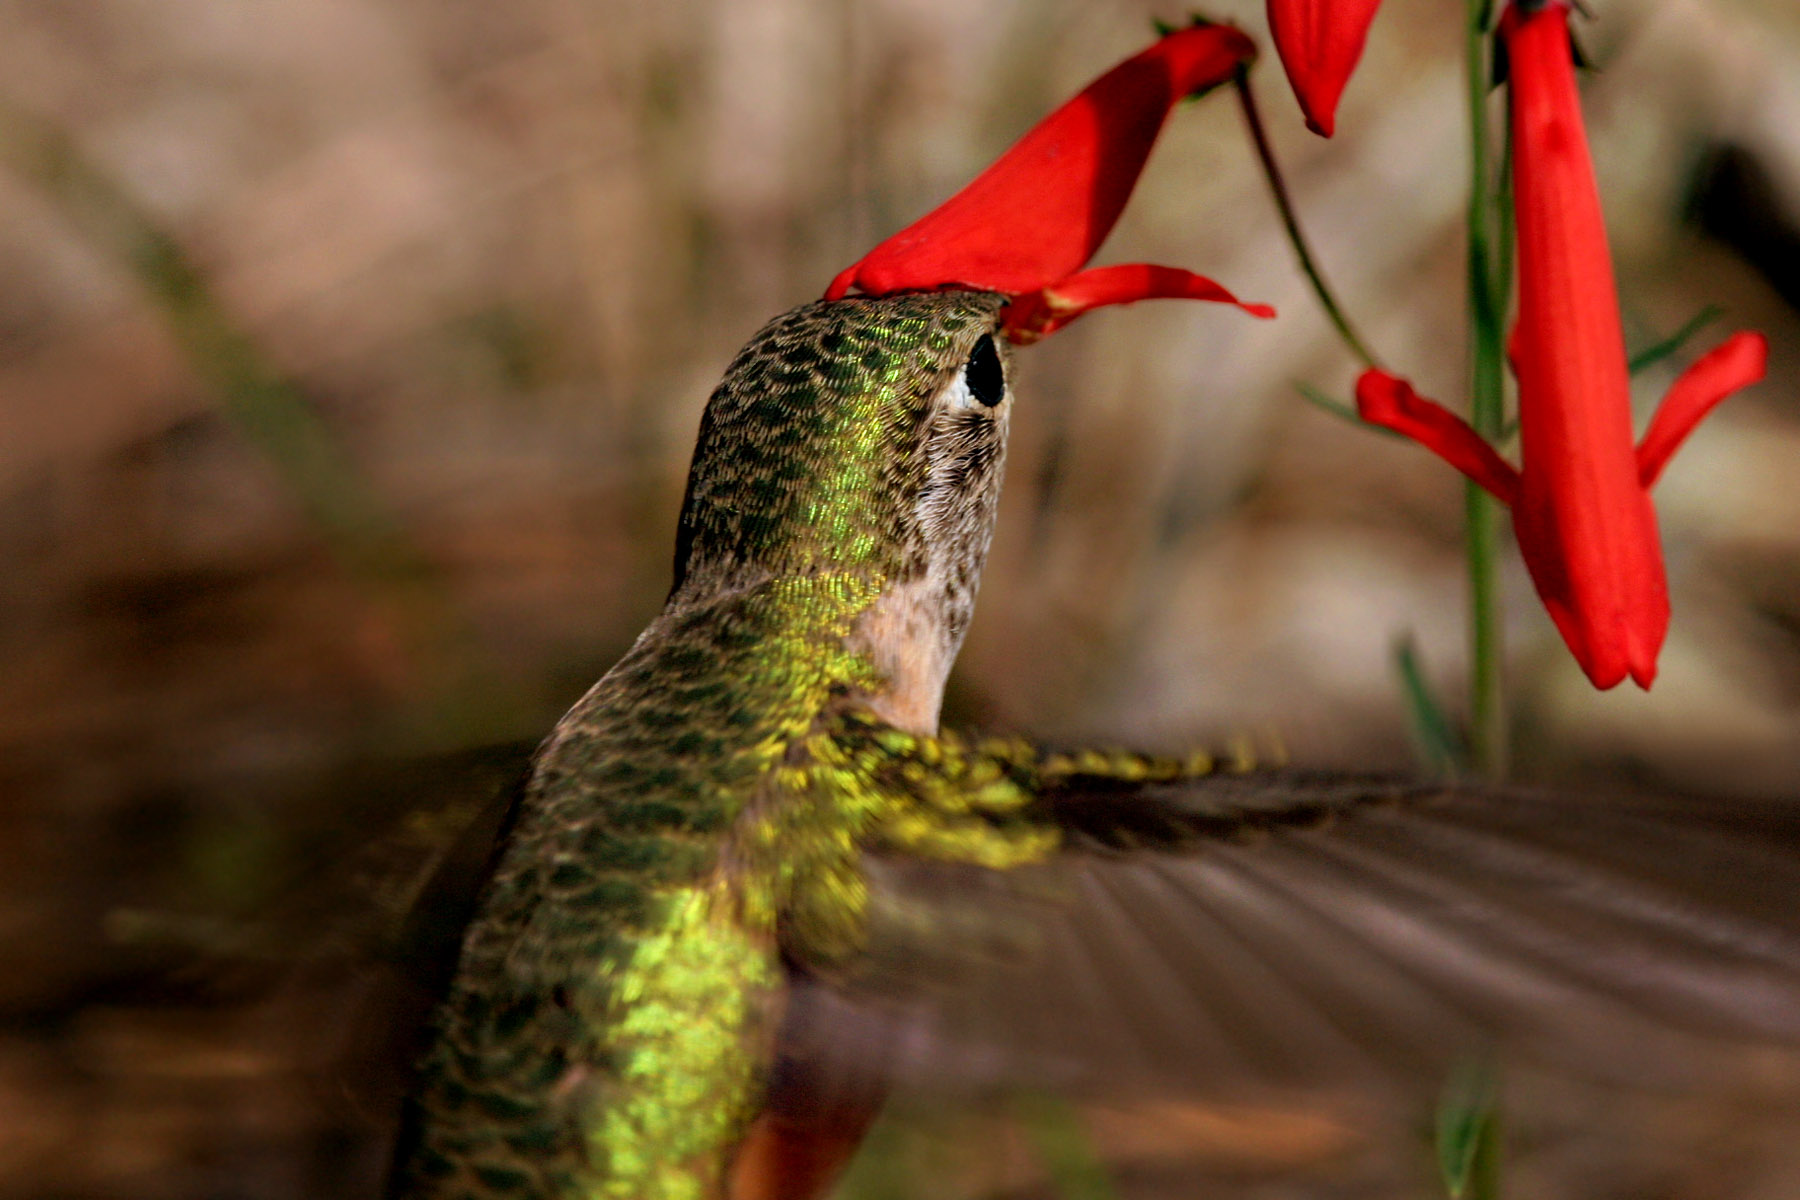 A hummingbird gathering nectar from the red flowers of Penstemon barbatus